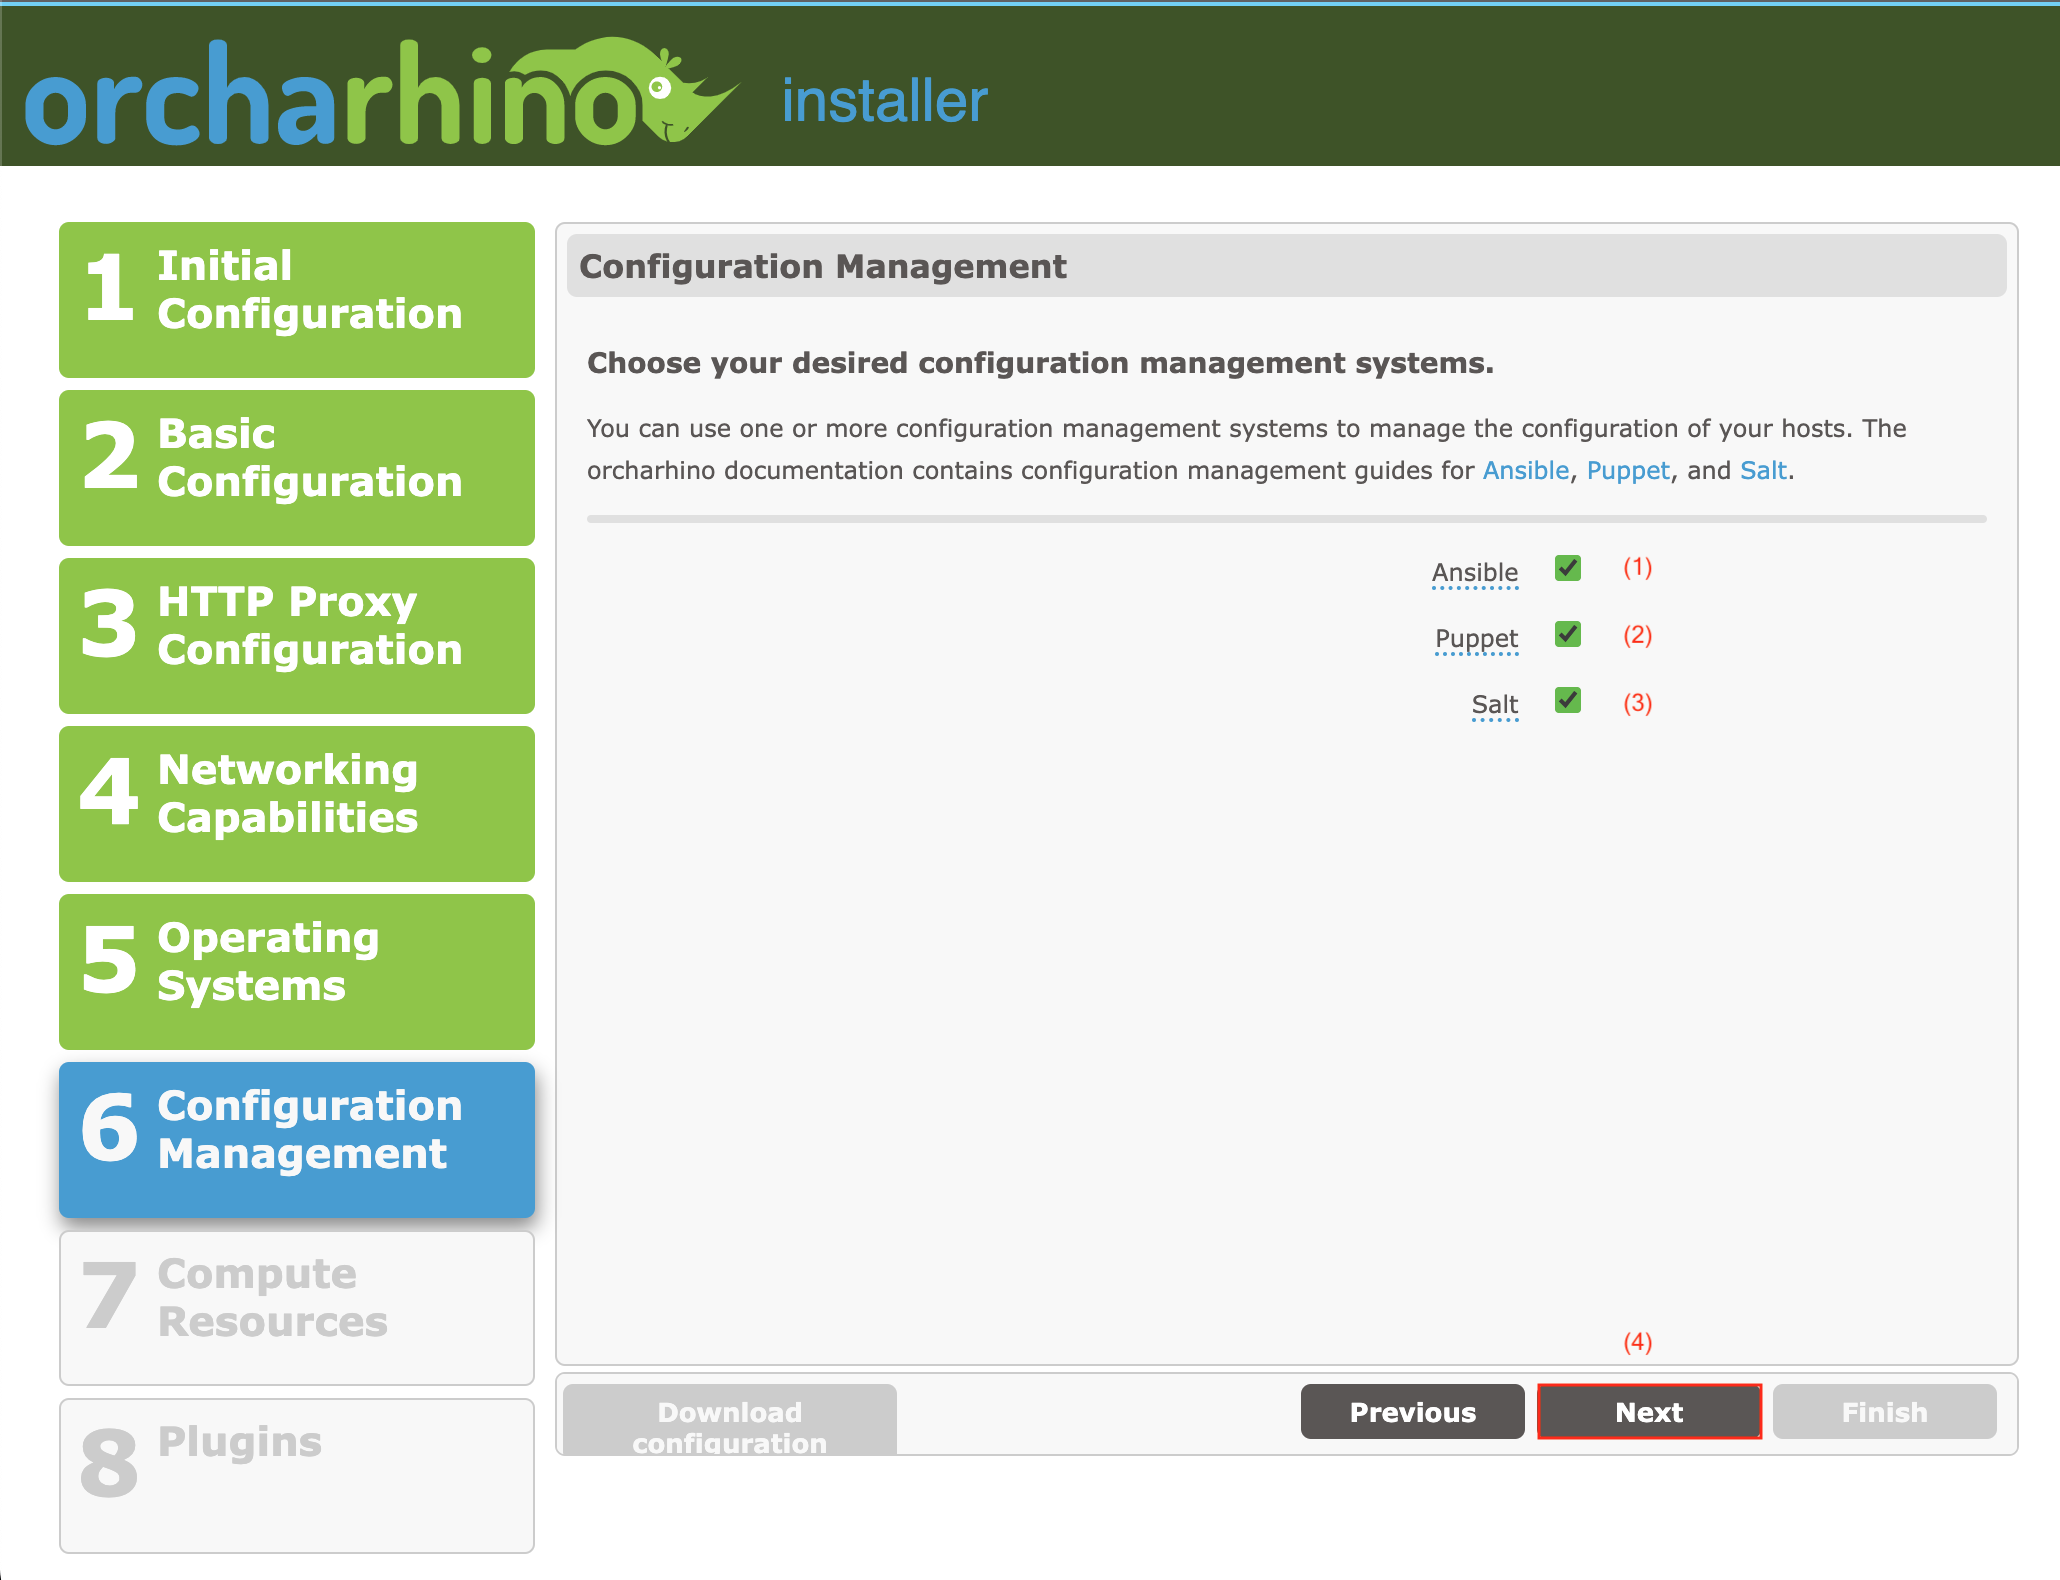 Selecting configuration management solutions in orcharhino Web Installer